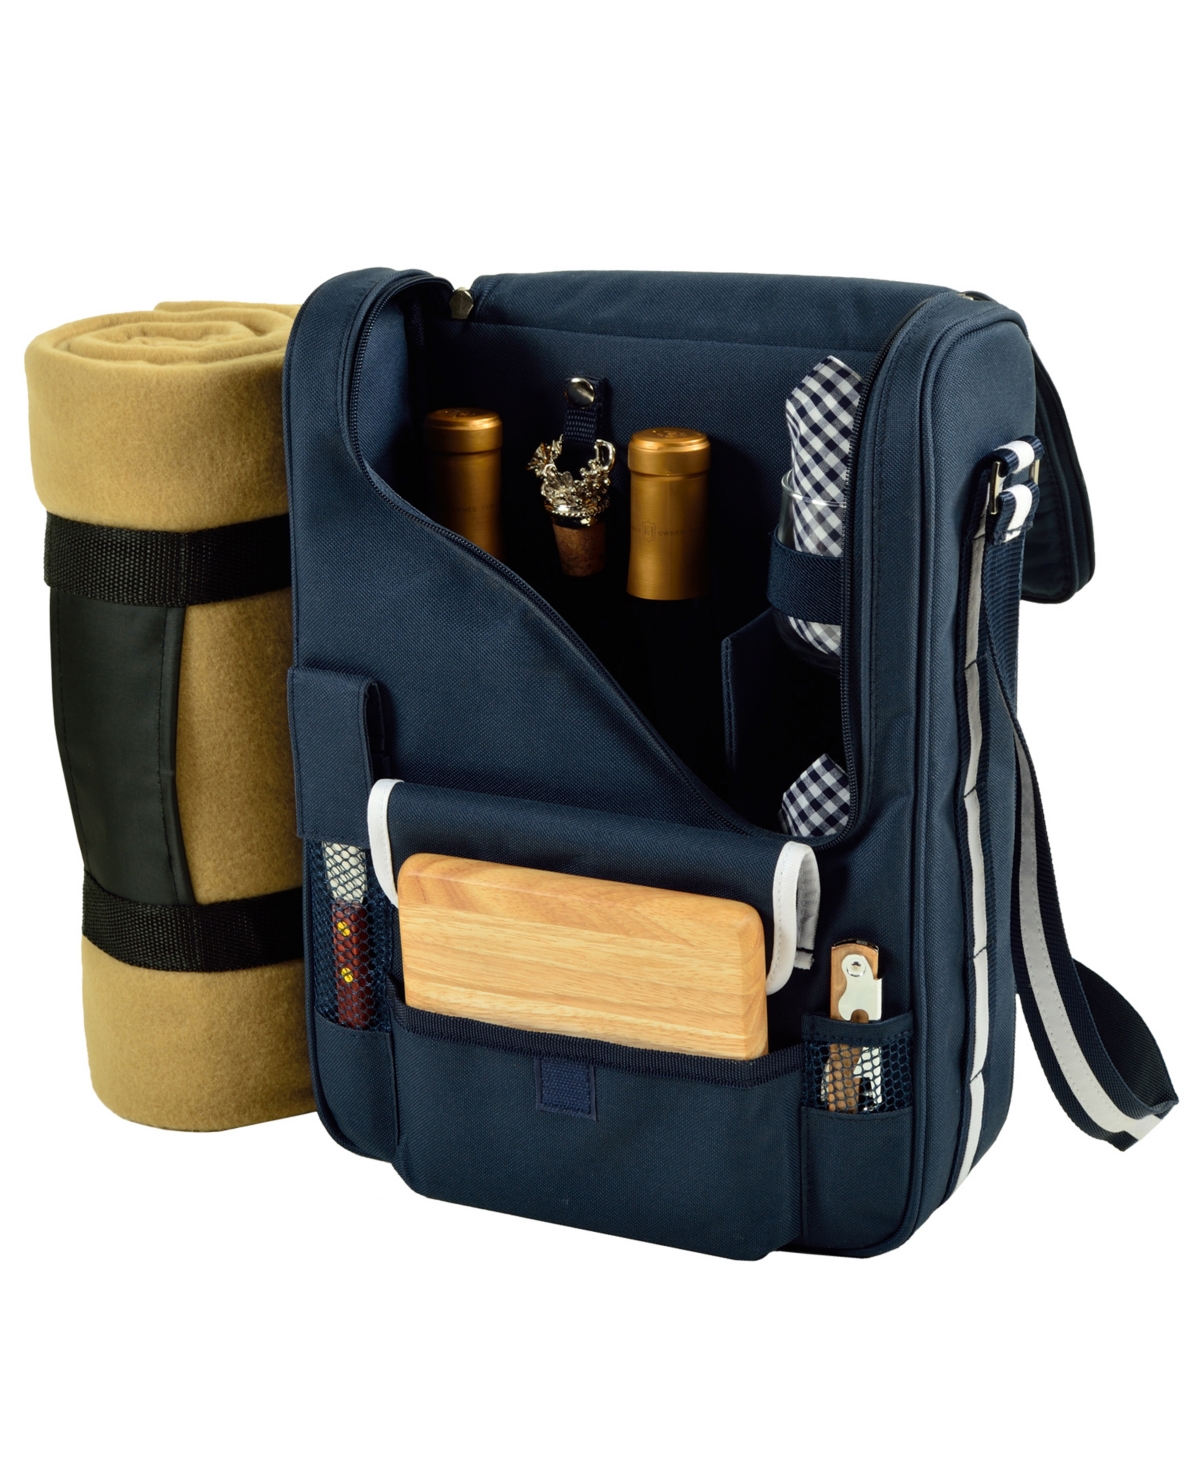 Bordeaux Insulated Wine, Cheese Tote with Blanket-Glass Glasses - Blue